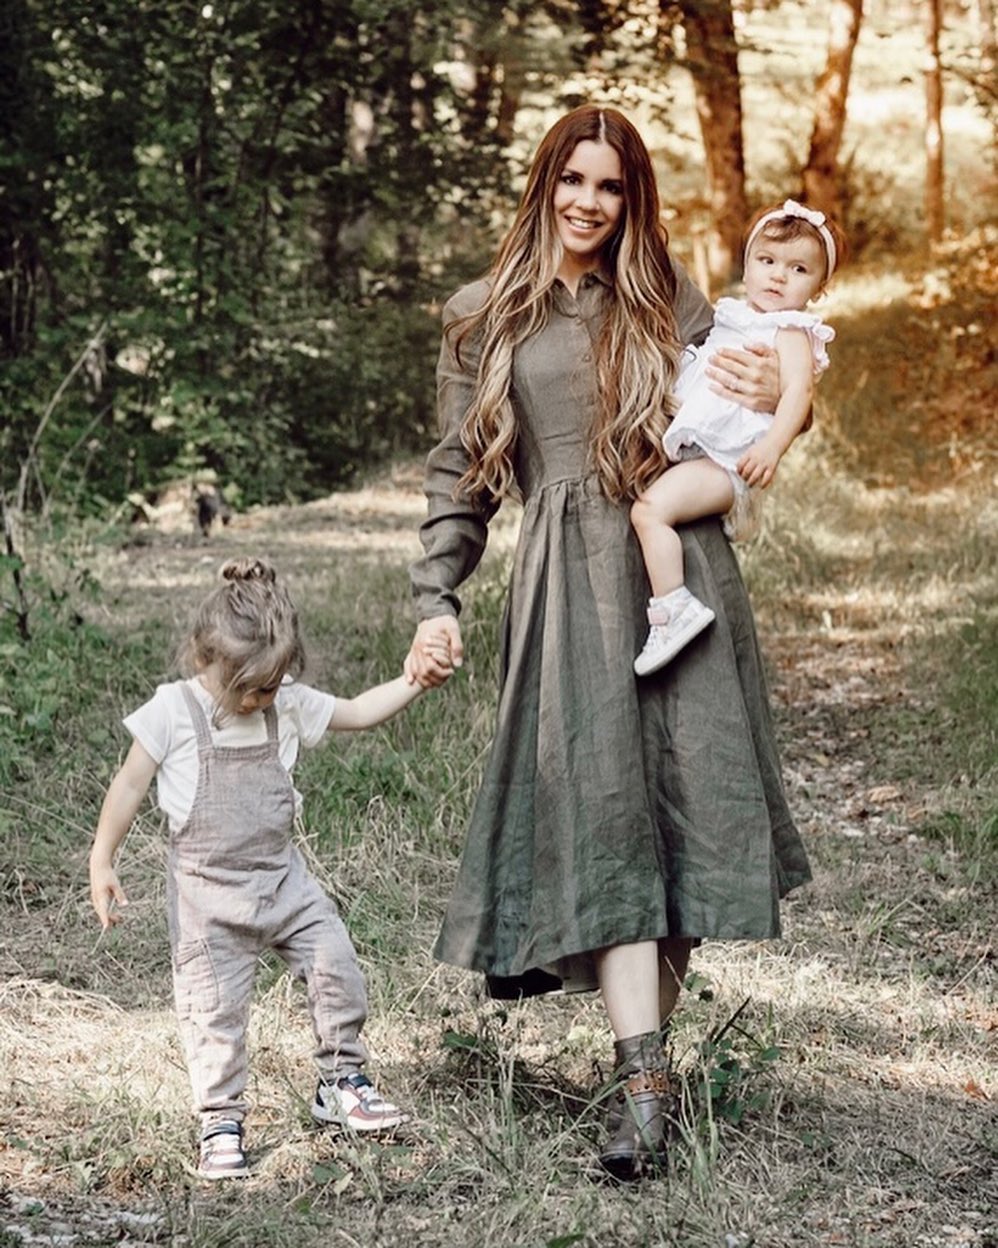 Manou and her children. | Source: Courtesy of Manou